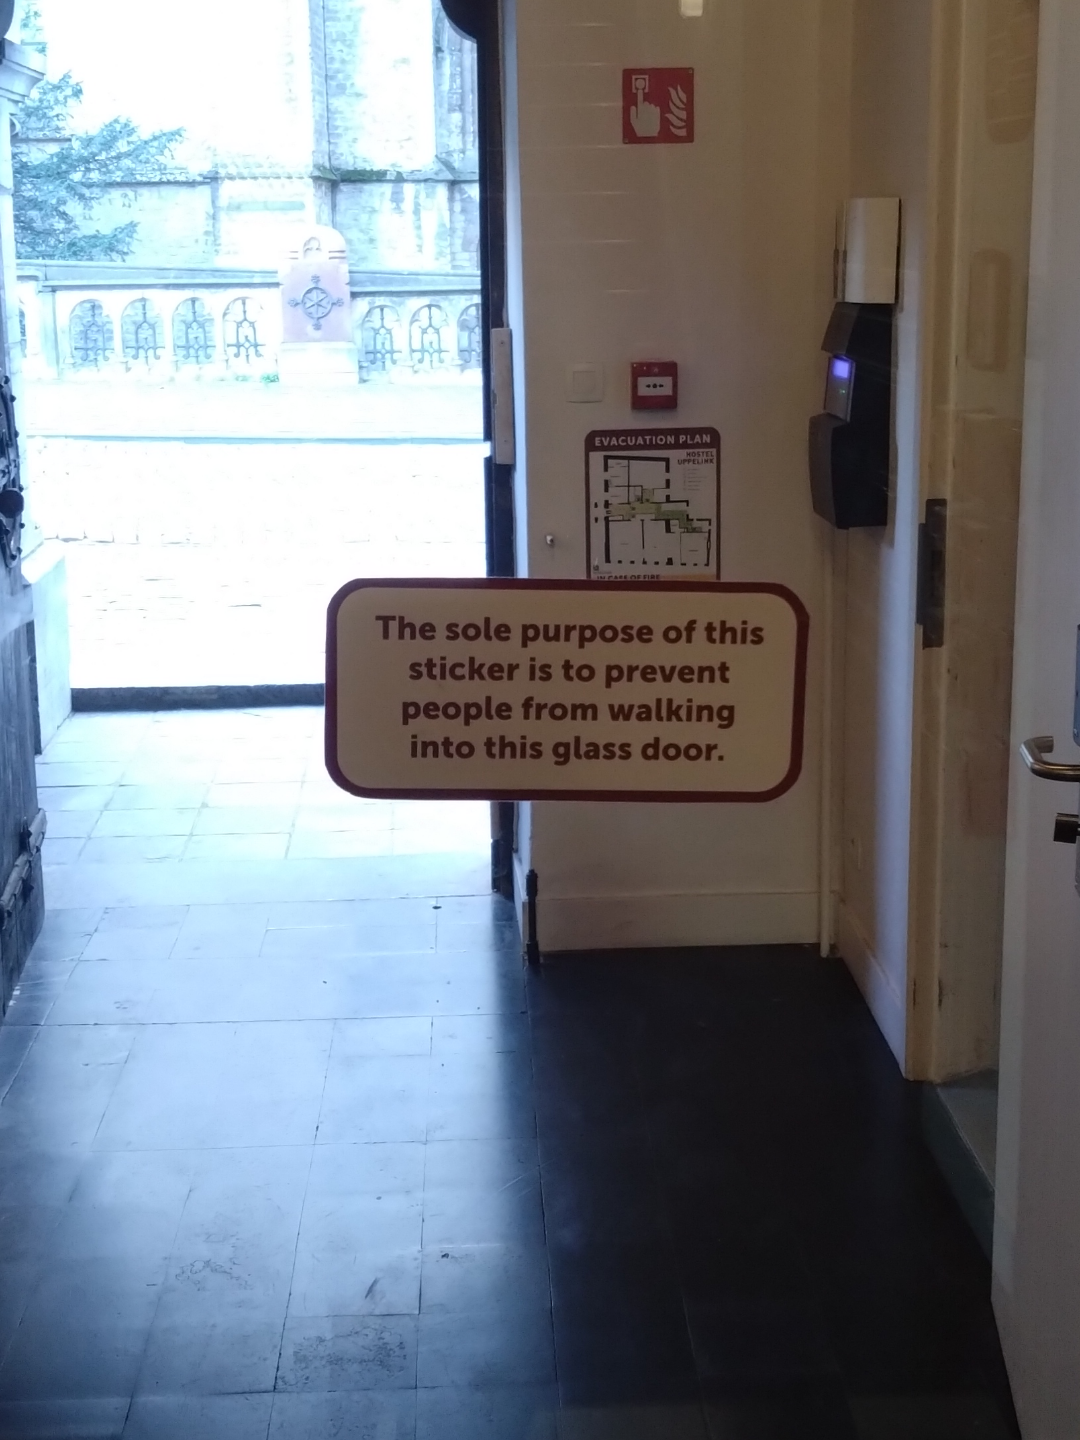 &quot;The sole purpose of this sticker is to prevent people from walking into this glass door.&quot;